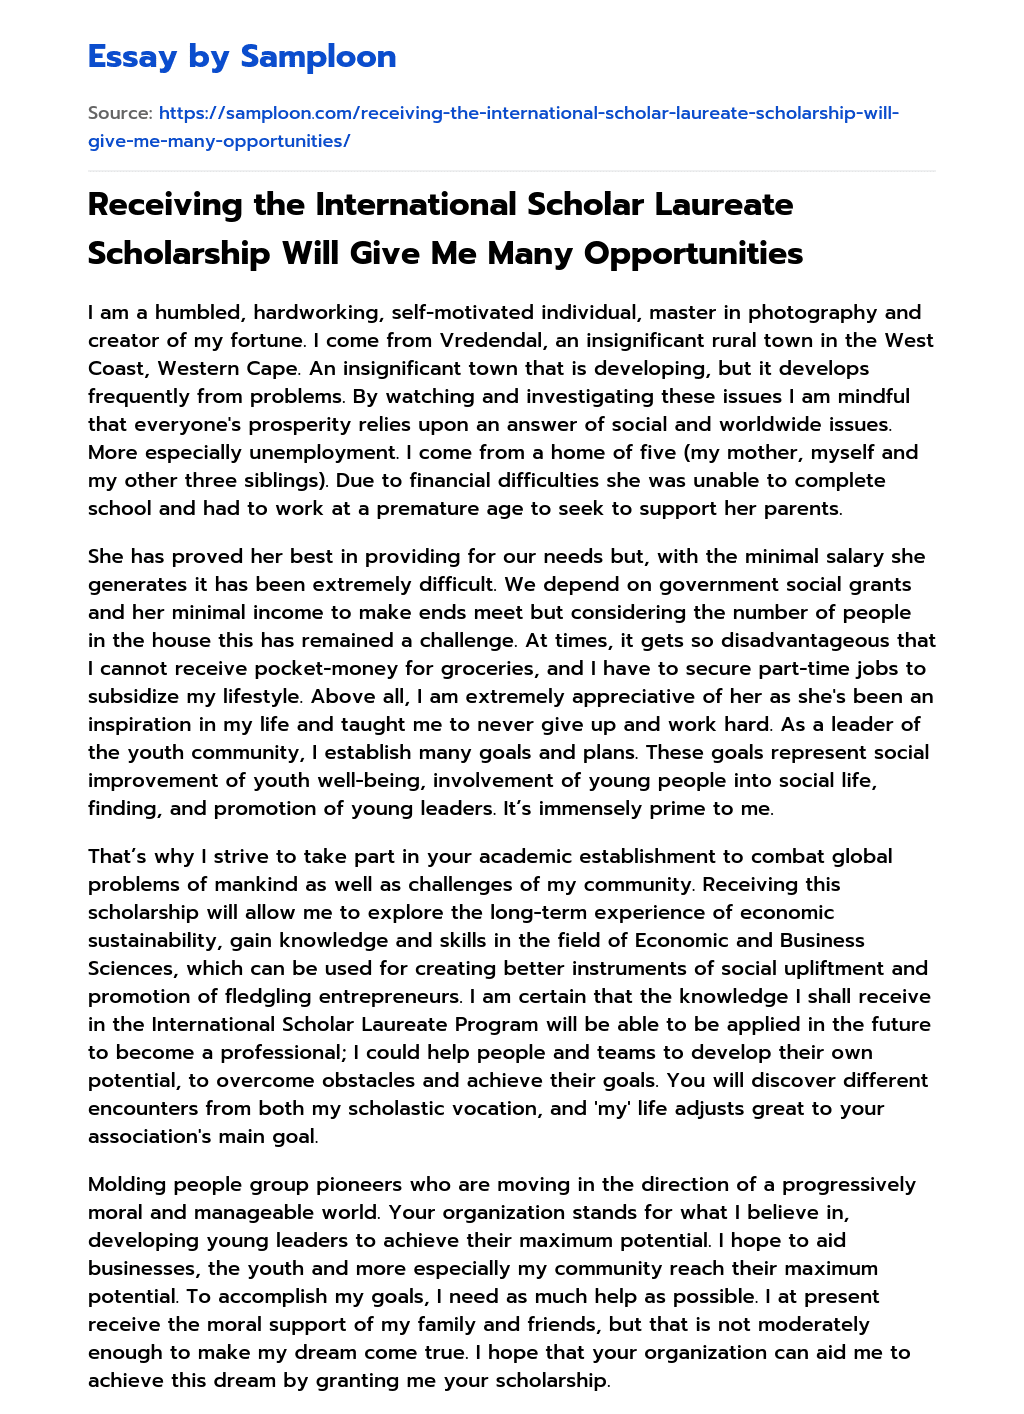 Receiving the International Scholar Laureate Scholarship Will Give Me Many Opportunities essay